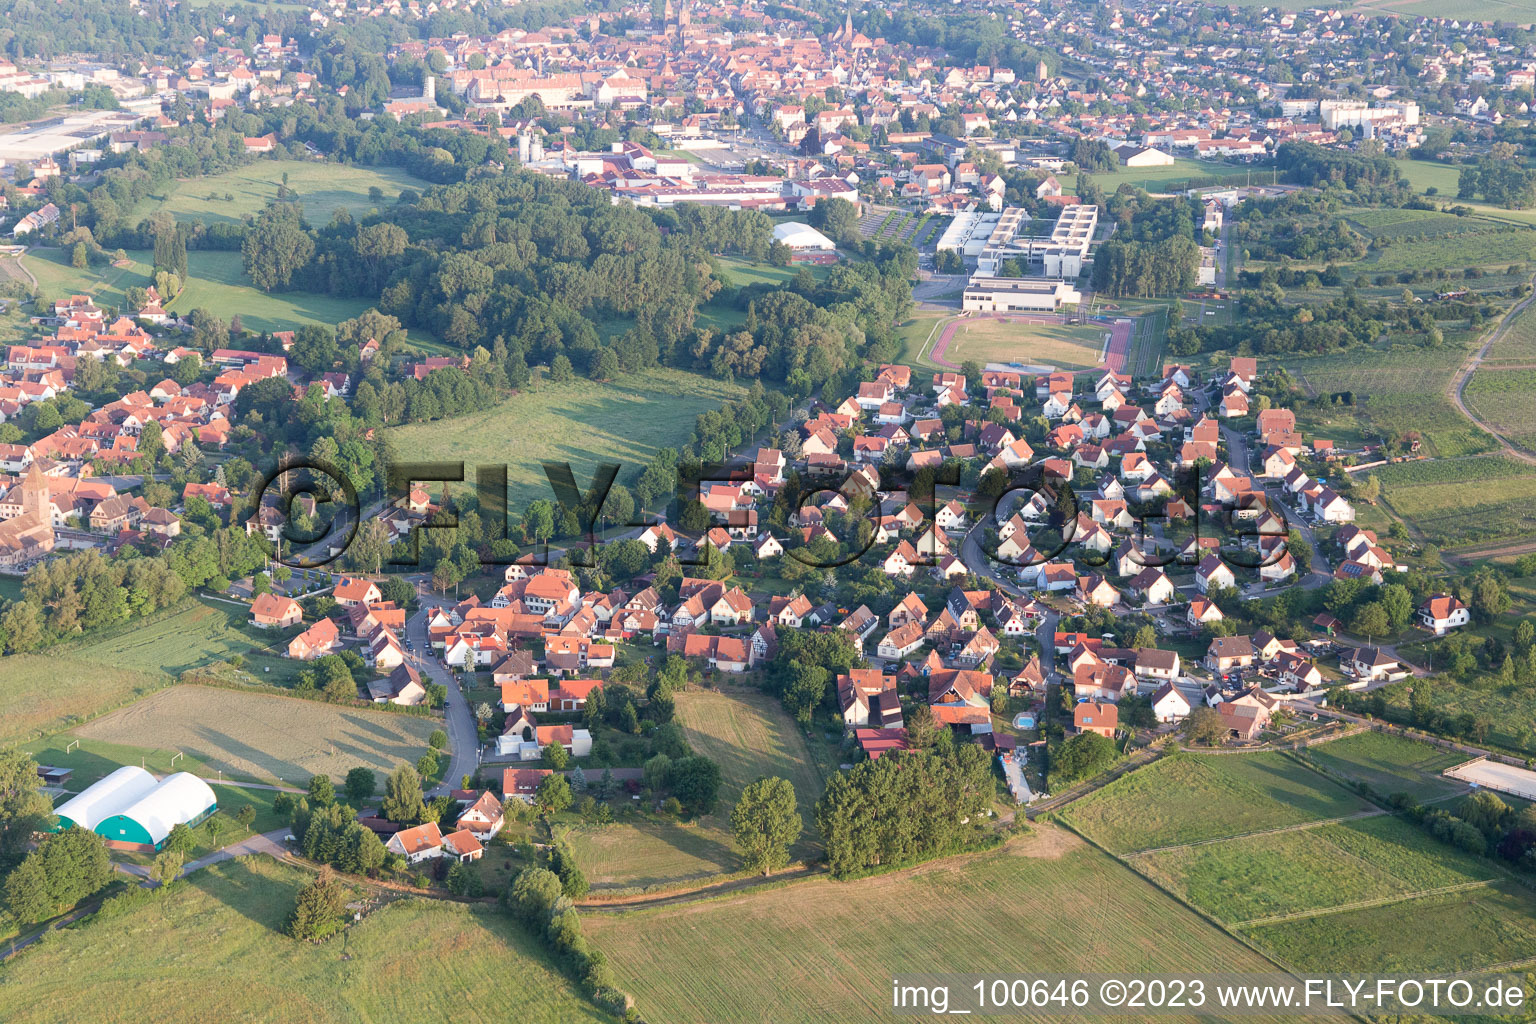 Altenstadt in the state Bas-Rhin, France viewn from the air